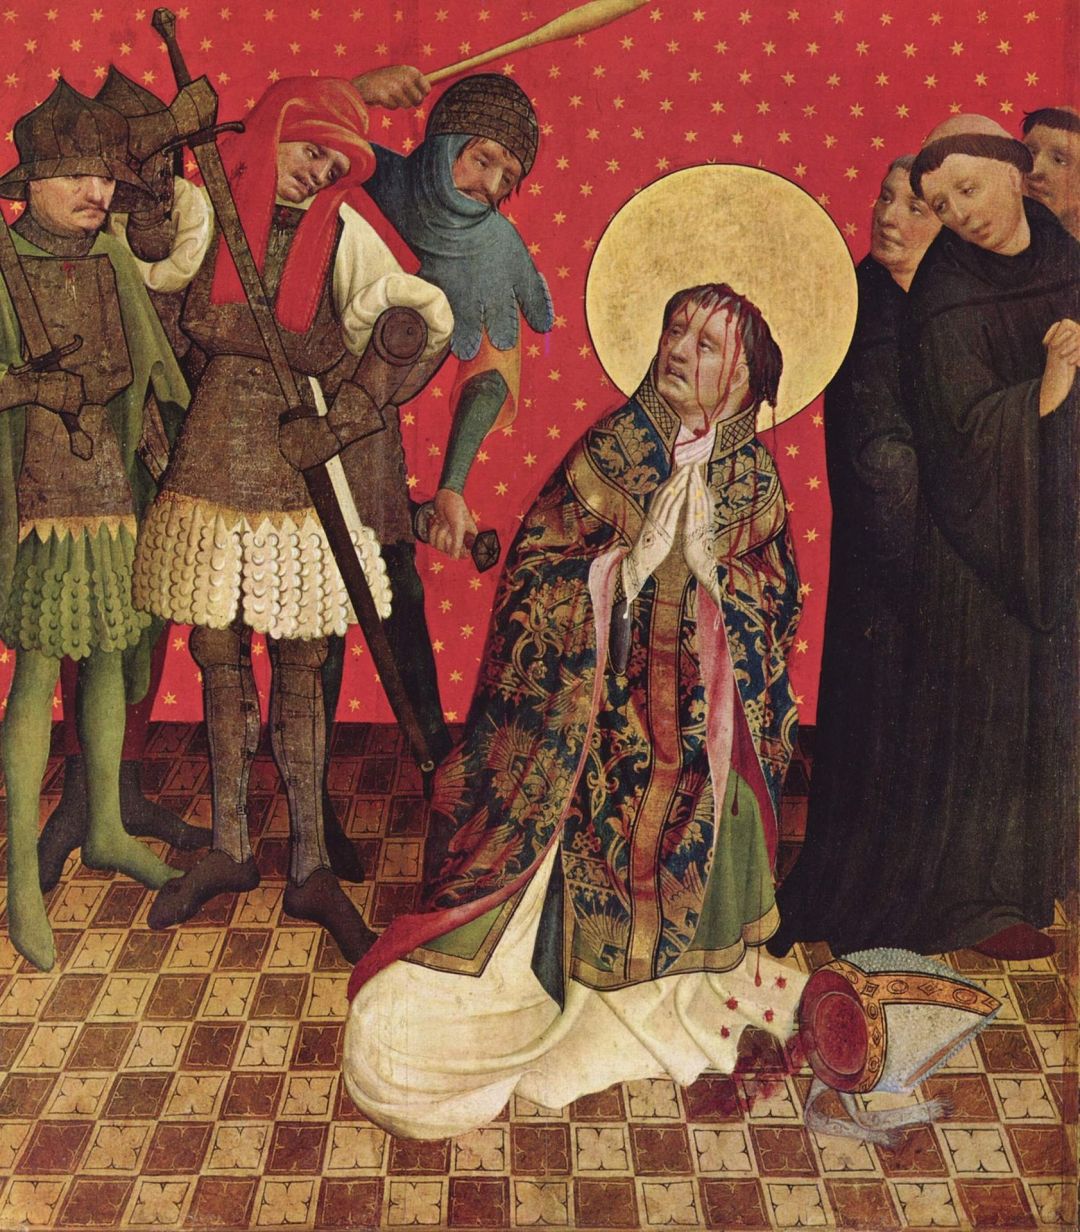 St. Thomas Becket - 5th Day of Christmas